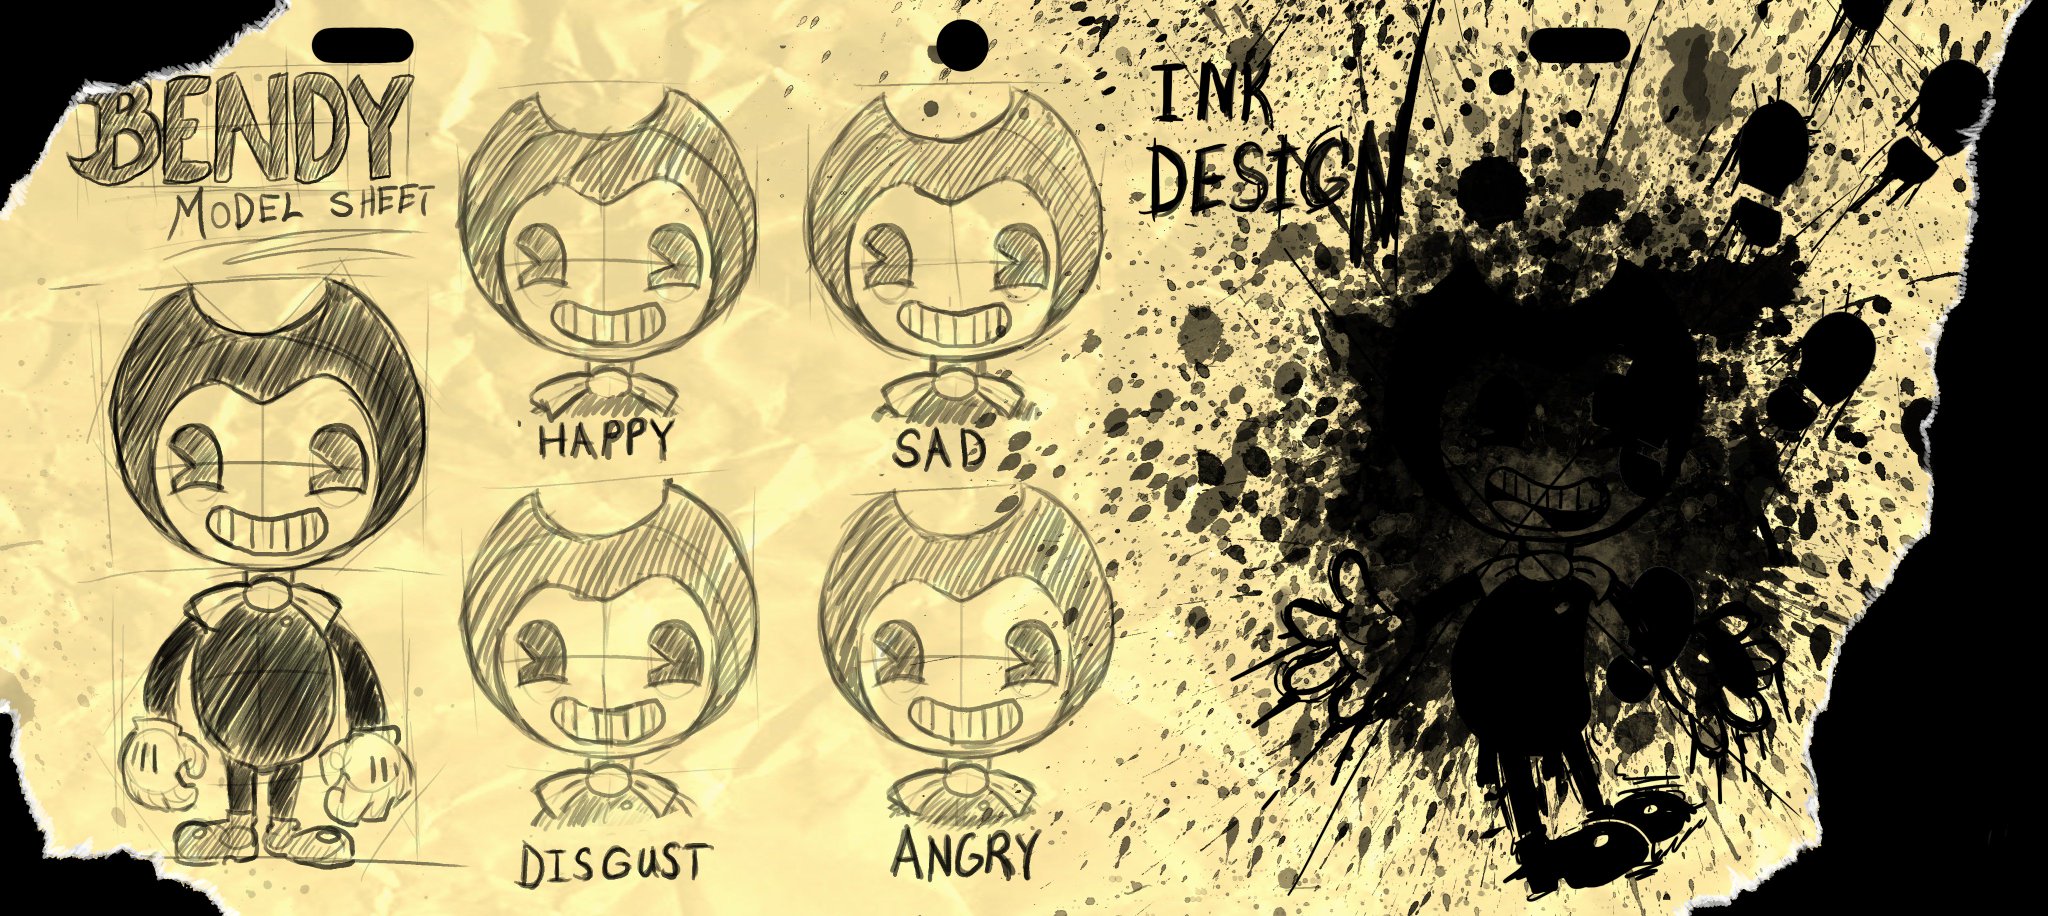 bendy and the ink machine chapter 5 contest